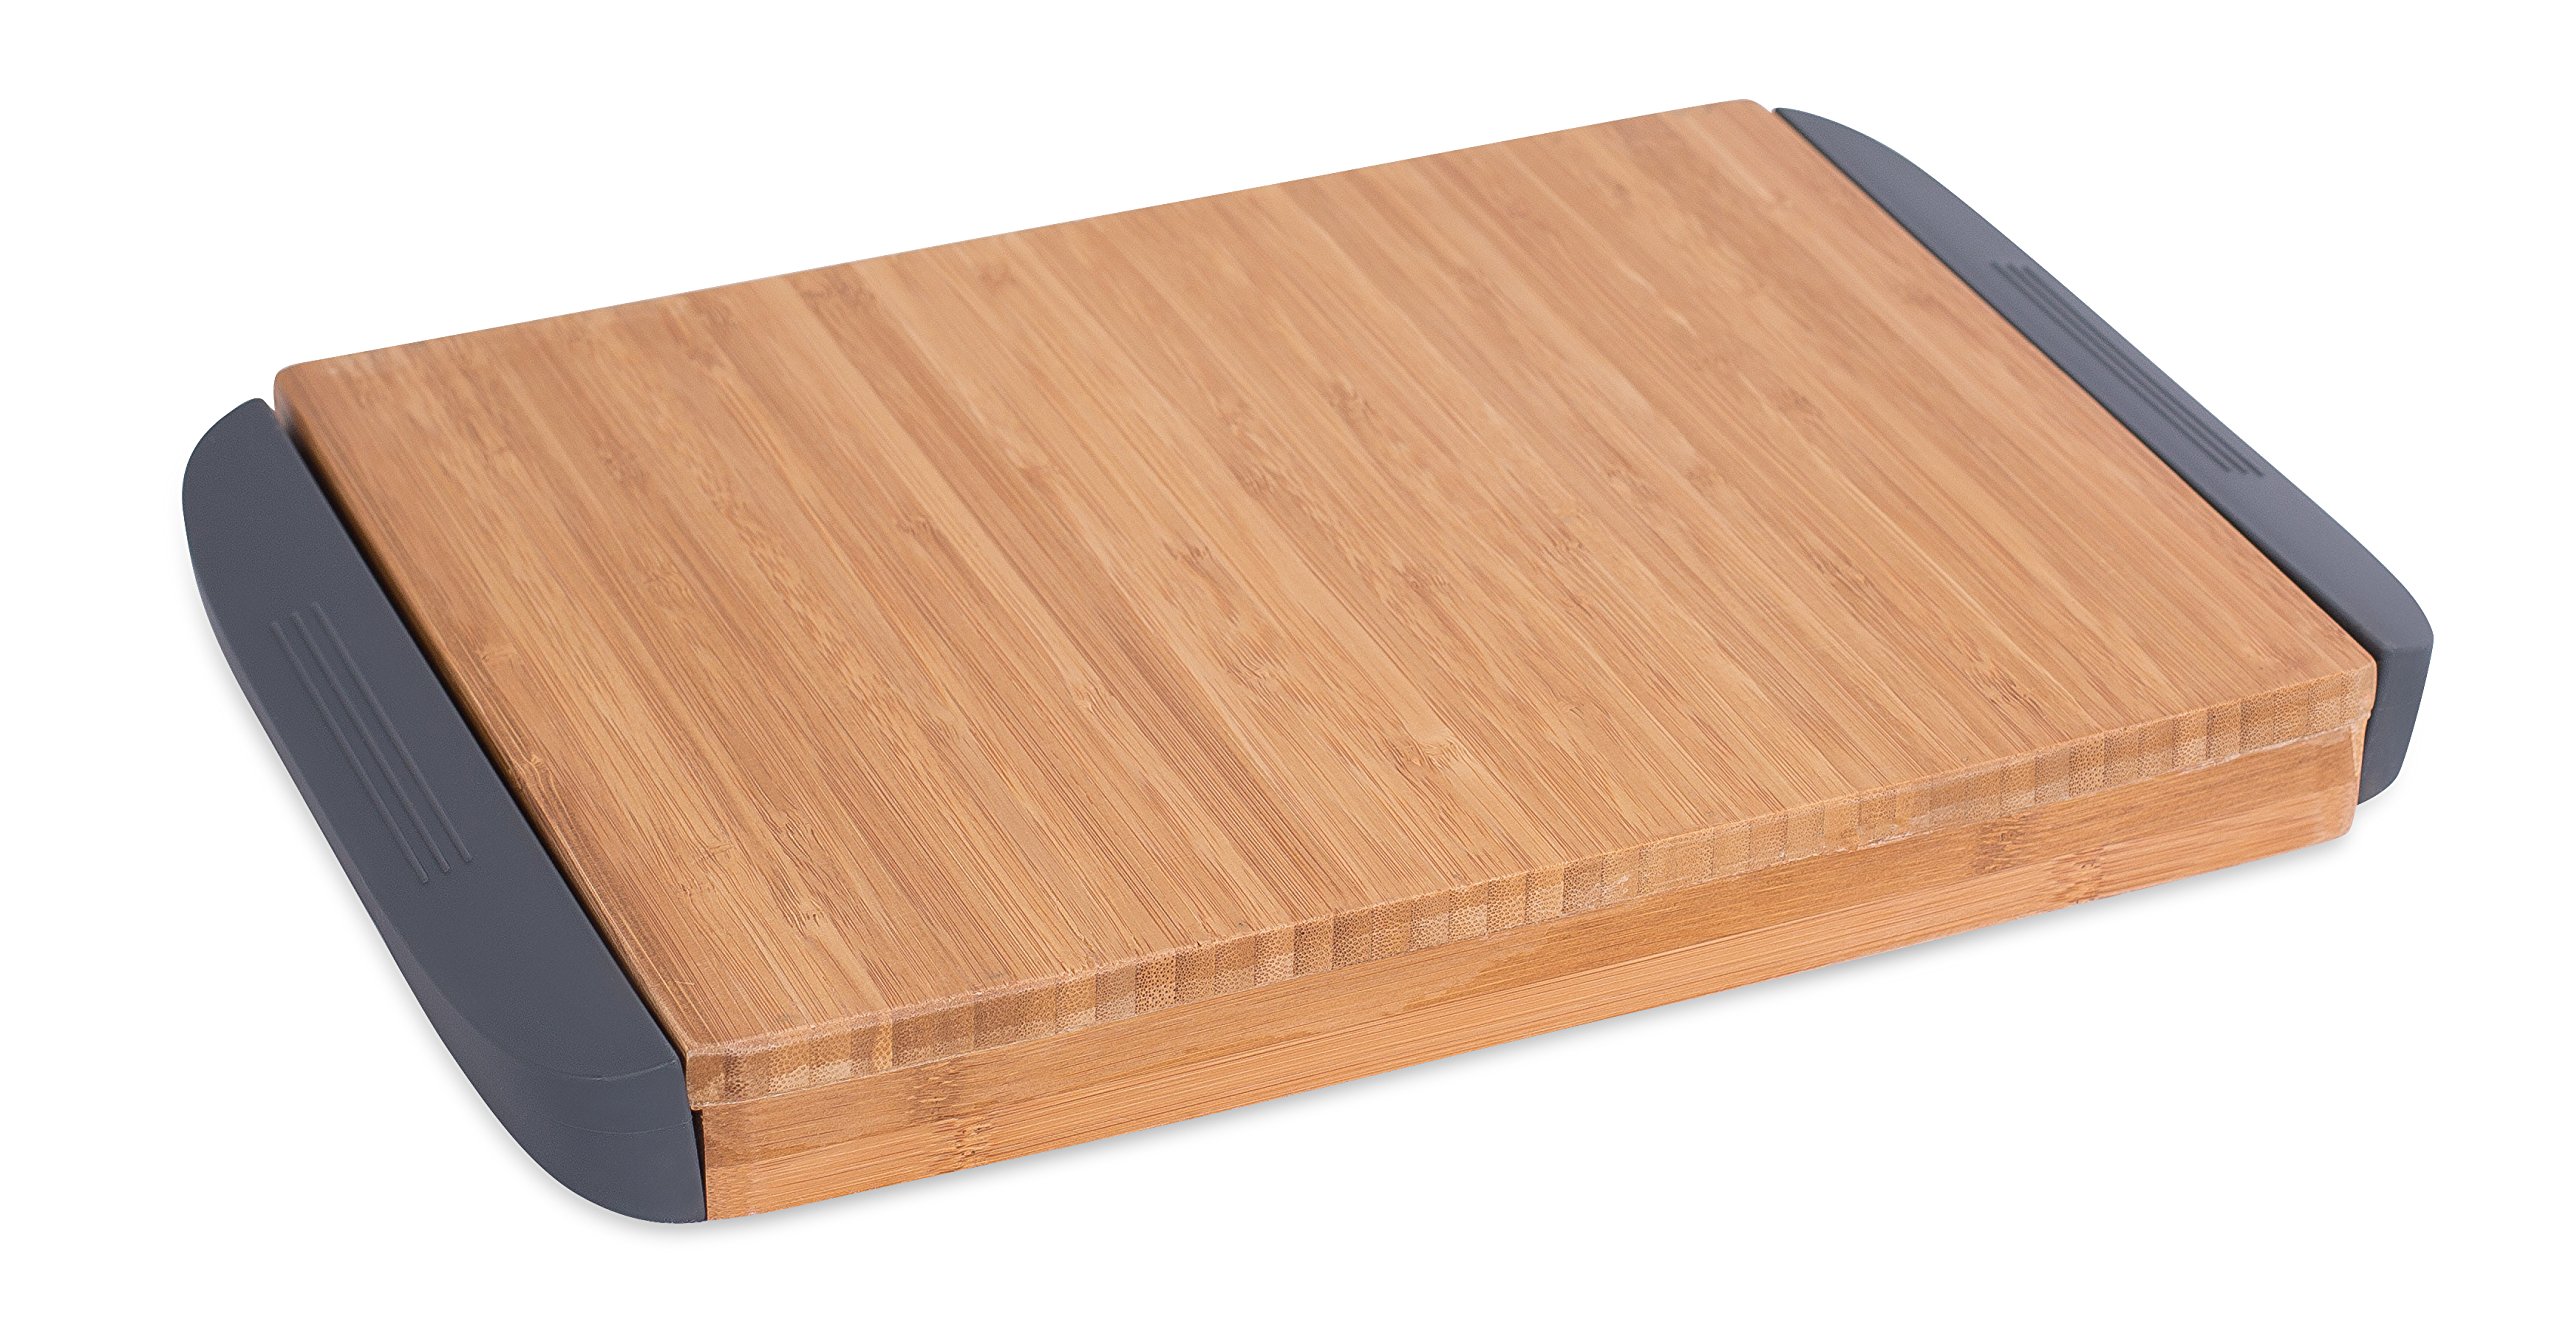 Internet’s Best Bamboo Cutting Board with Removable Drawer - Prep Storage - Chopping Slicing Wood Block Kitchen Board